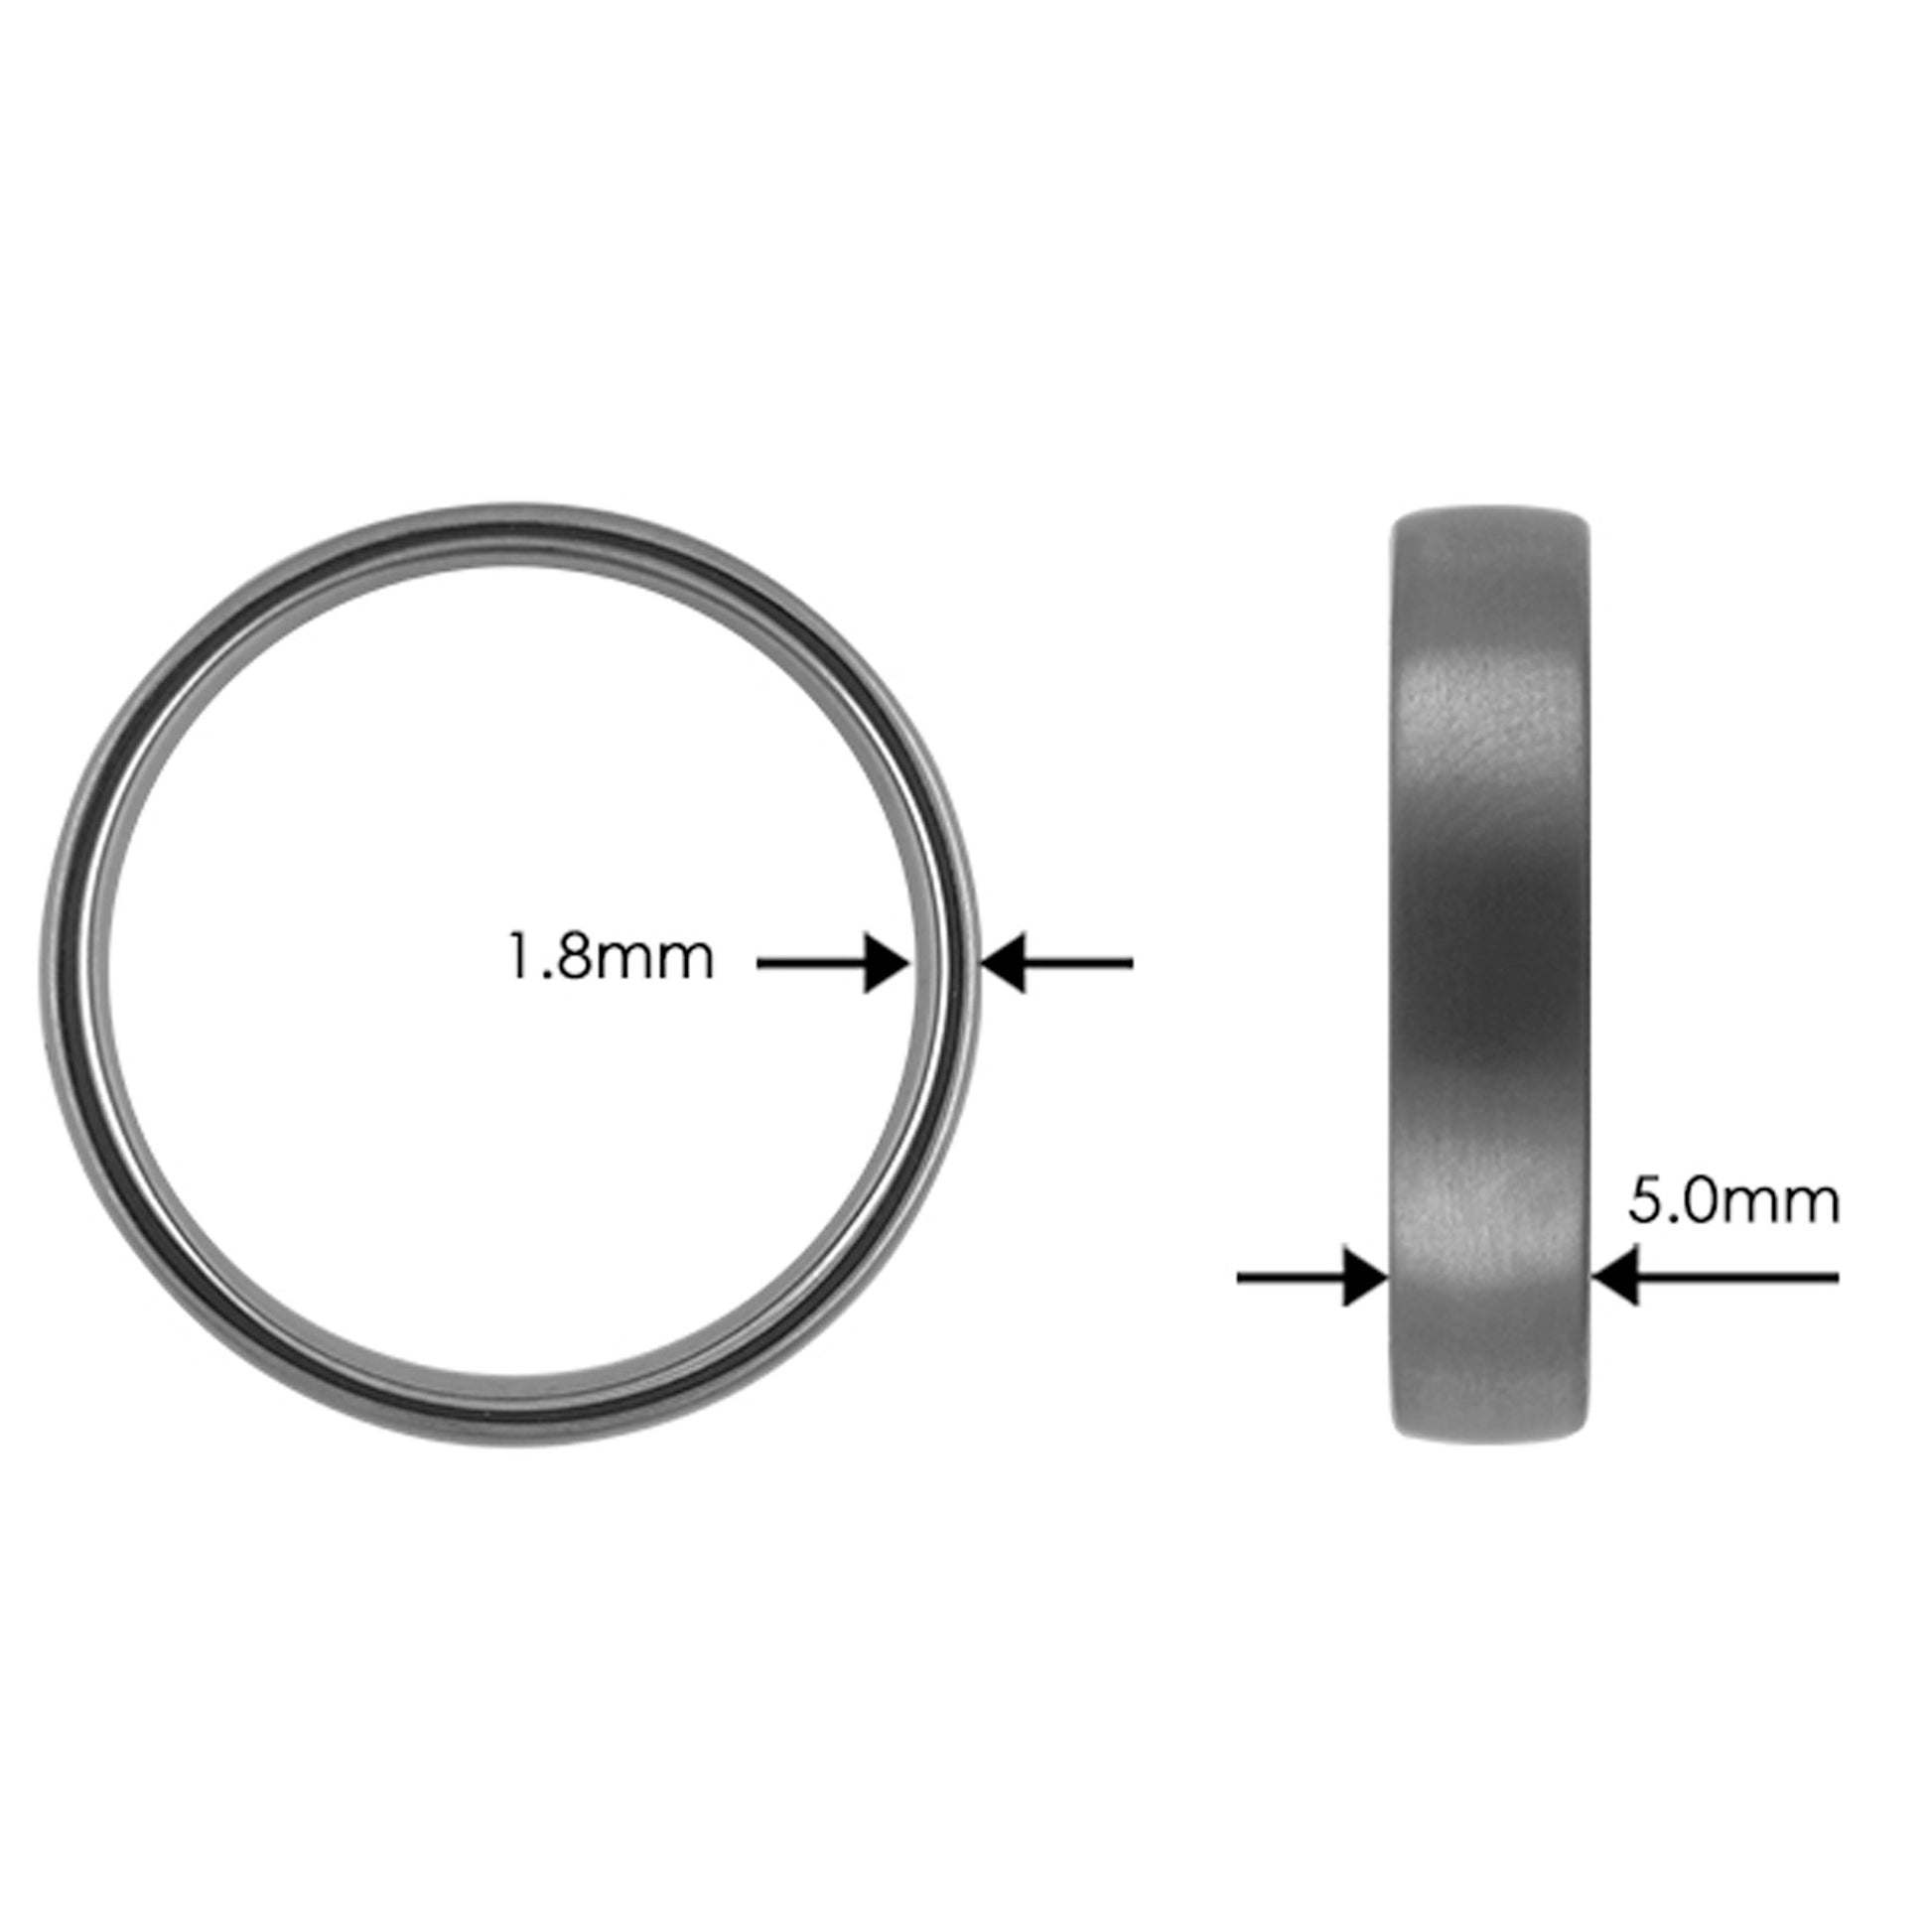 Tantalum Ring w/o min. Matte Ring profile: width: 5.0 mm || height: 1.8 mm. Matt tantalum ring. The picture shows the width (5.0mm) and hight (1.8mm)) of the ring